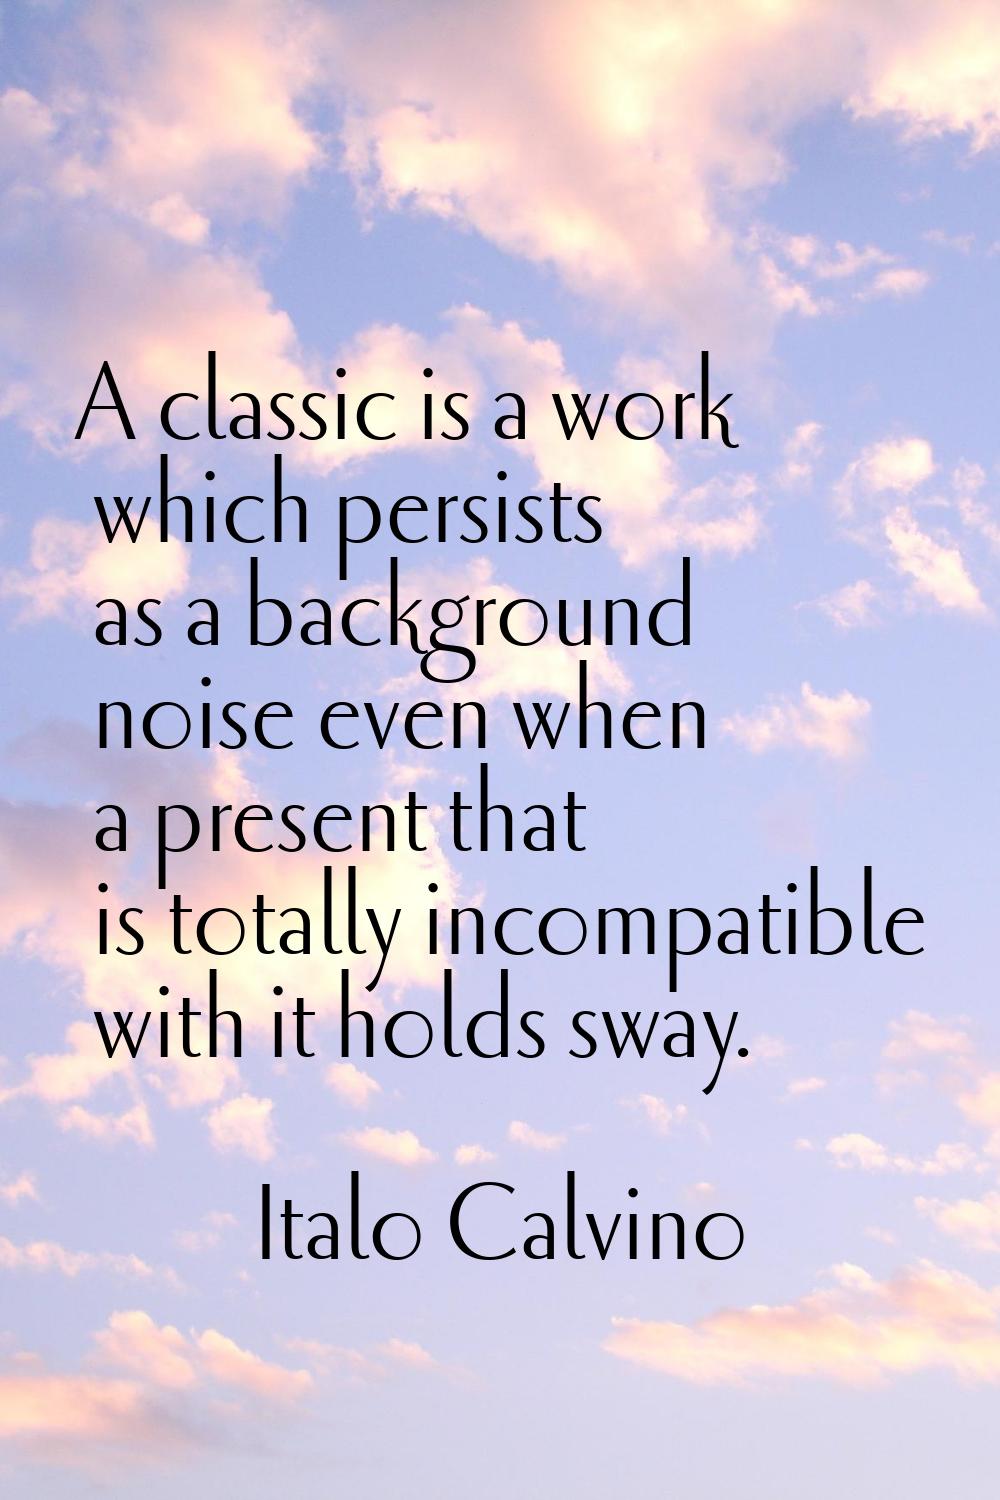 A classic is a work which persists as a background noise even when a present that is totally incomp